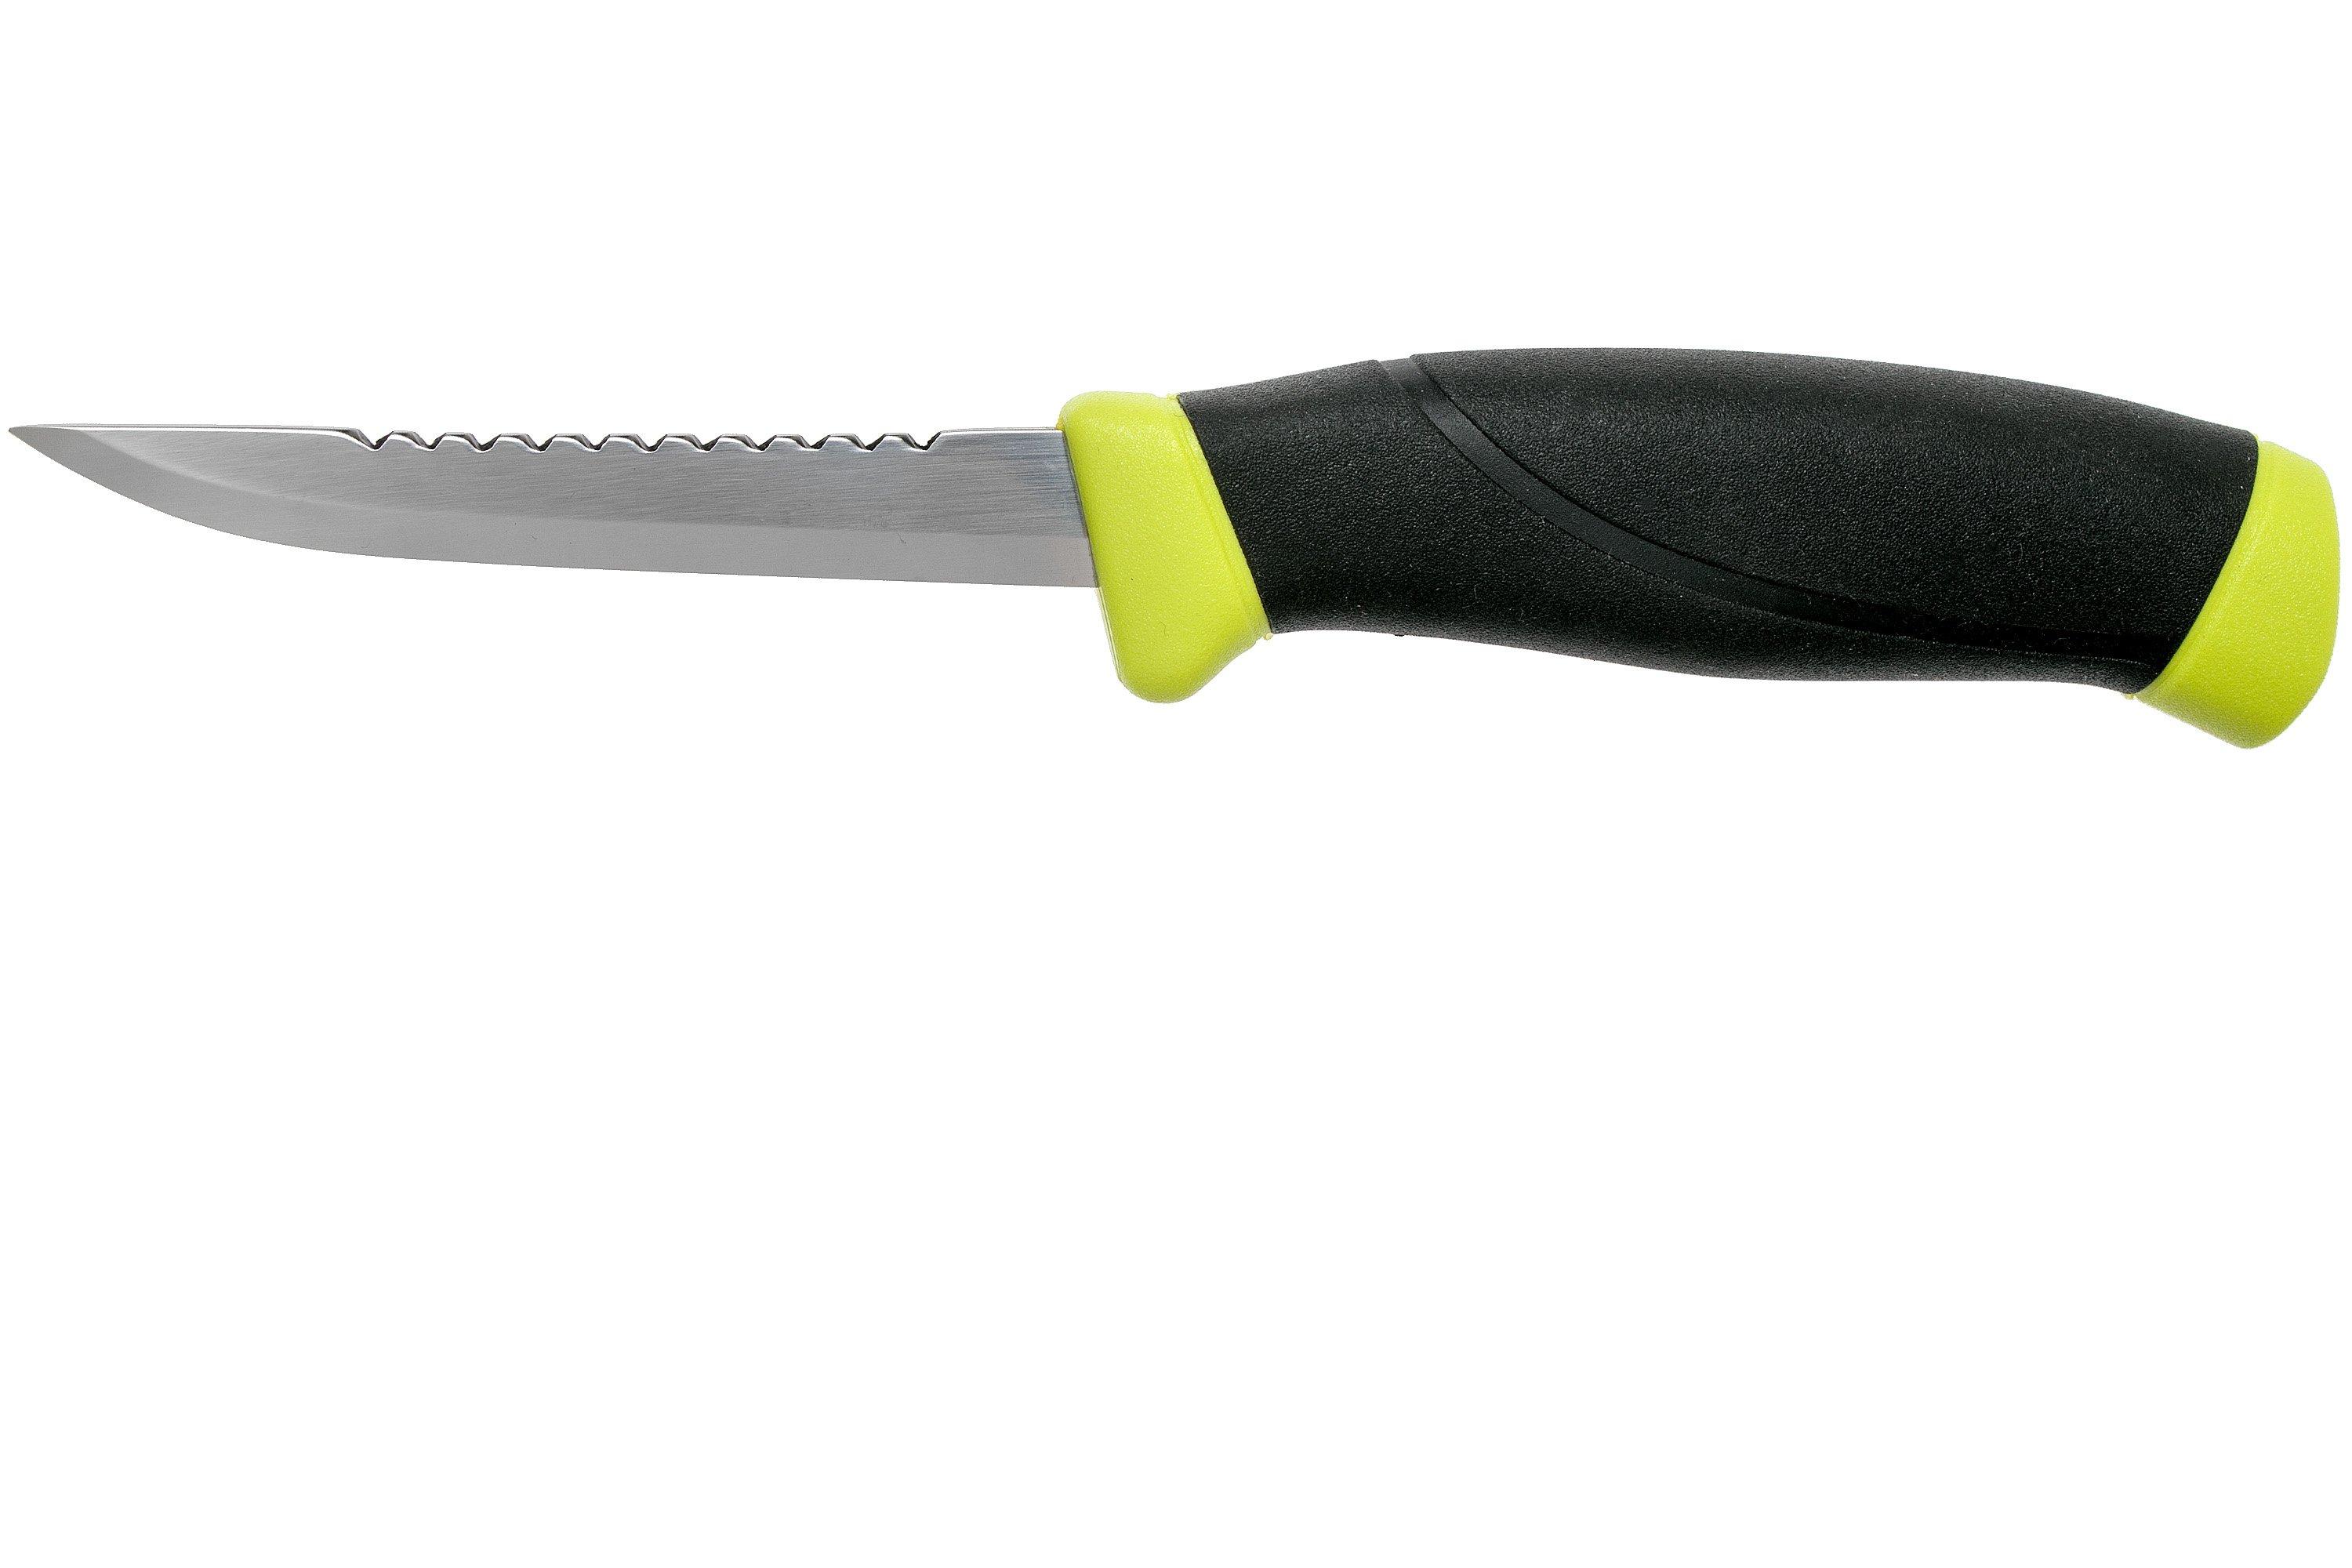  Morakniv Fishing Comfort Scaler Knife with Serrated Stainless  Steel Blade, 3.9-Inch